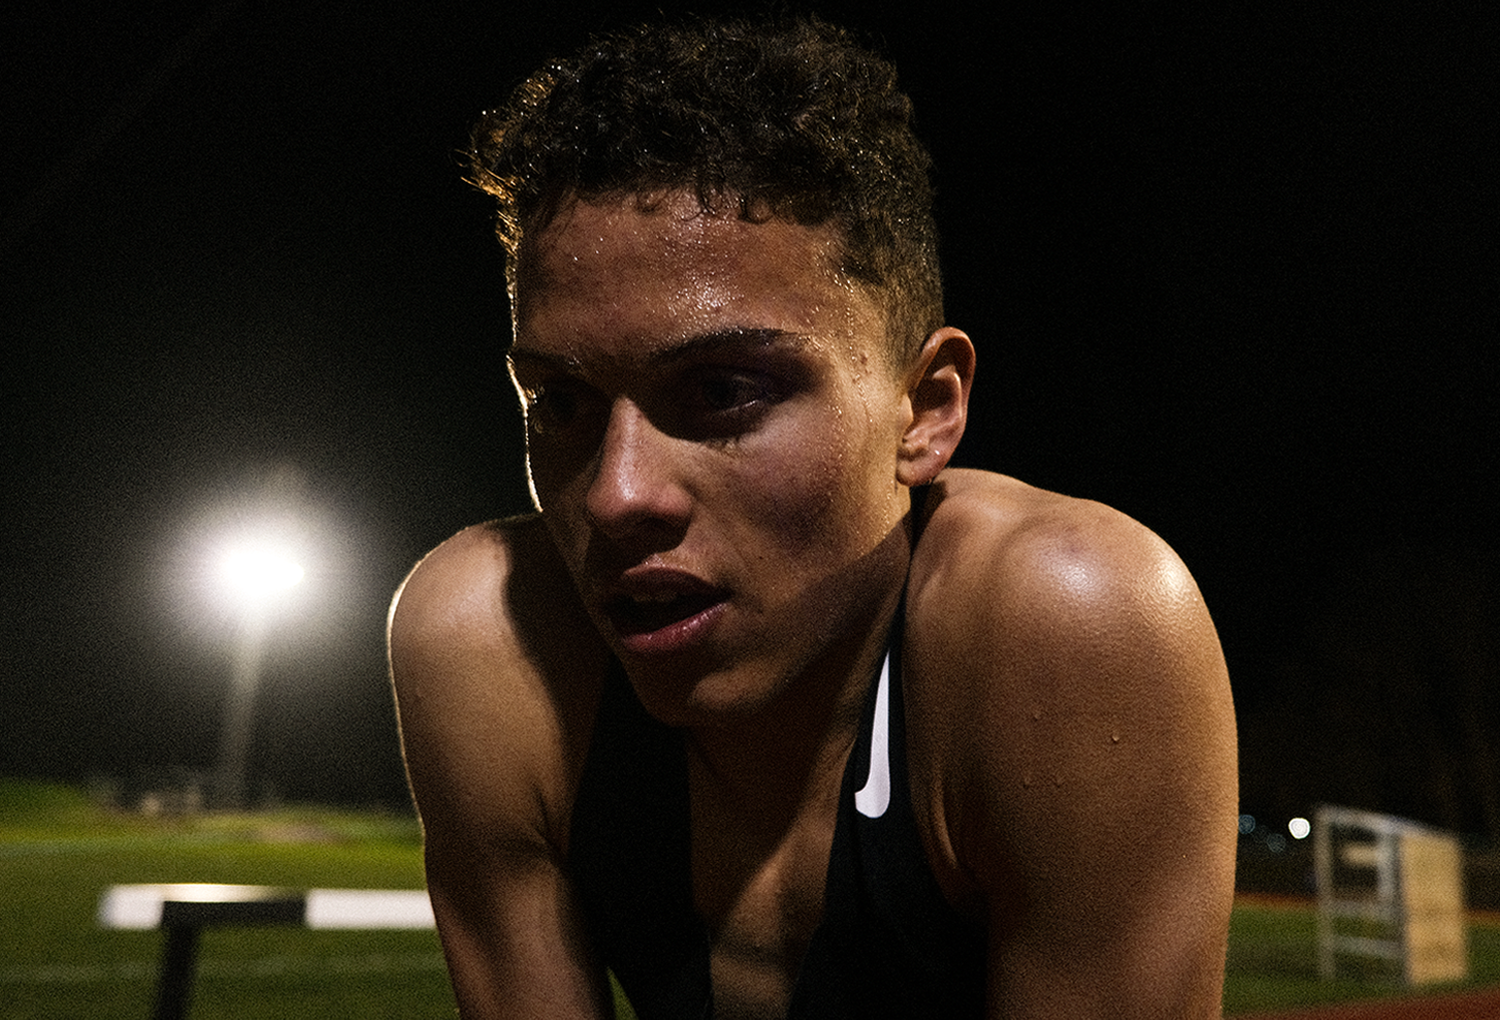 athlete sweating during an endurance activity 